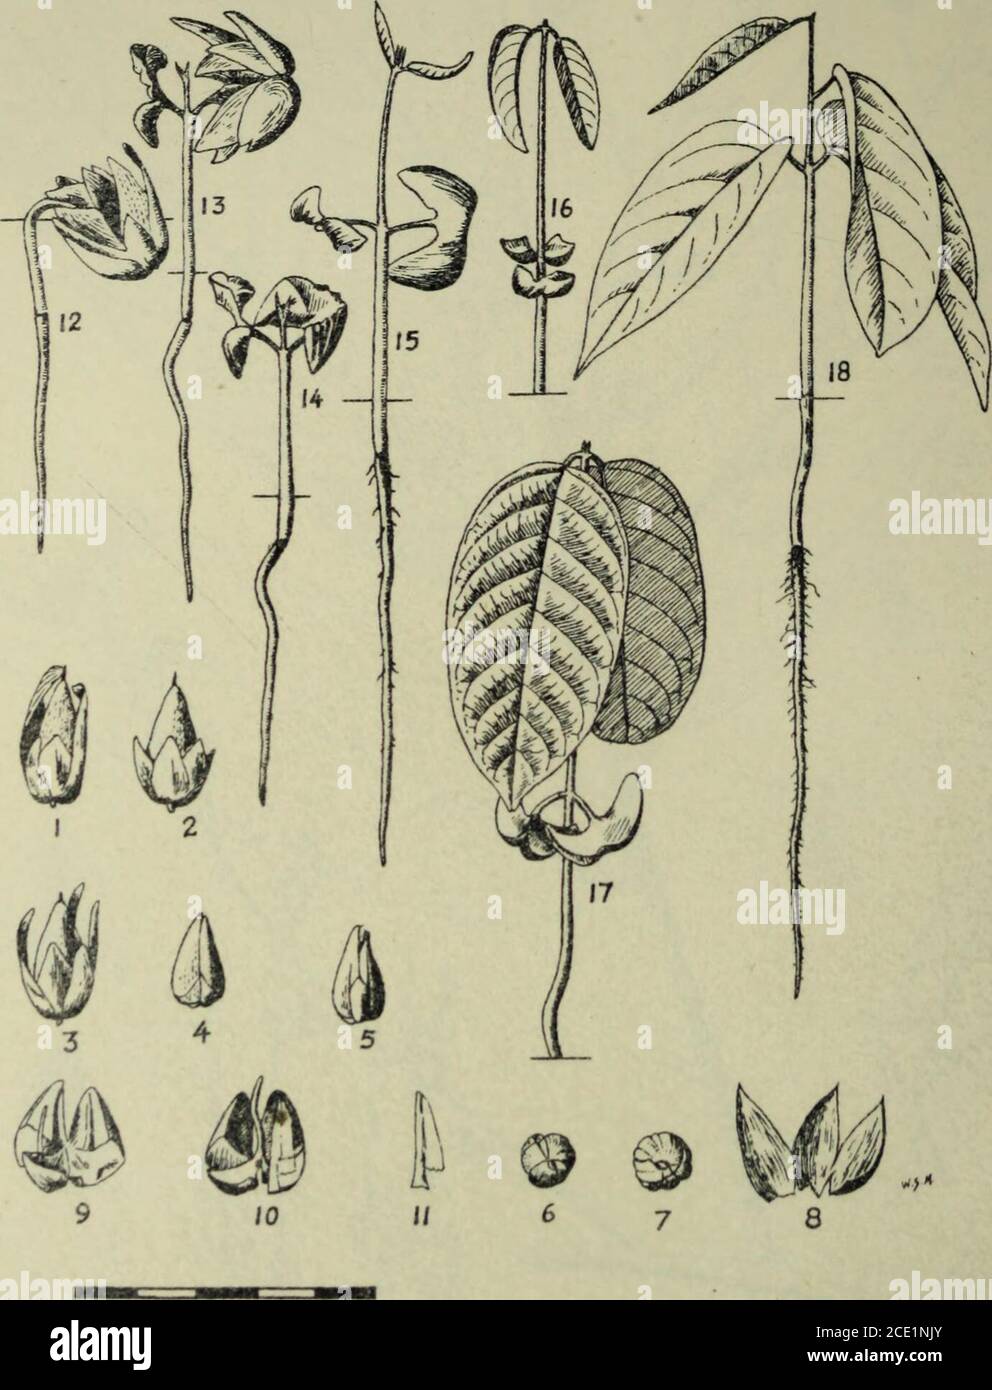 . The Gardens' bulletin; Straits Settlements . Gard. Bull. S. S., Vol. VIII. Plate XXII. 5 cm. Hopea apiculata Sym. 277 Hopea apiculata Symington, sp. nov. Plates XXI & XXIISpecies H. laxae Sym., H. resinosae Sym., H. pachy-carpae (Heim) Sym., etc. affinis, nuce parvo, glabro,apiculato, segmentis brevibus chartaceis instructo, differt. Branchlets dark purple but usually covered with a paletomentum, with decurrent elevate lines from the insertionof the petiole. Leaves lanceolate or oblong-lanceolate,gradually tapering to the acuminate apex, base subequal,rounded, or subcordate, about 13.0 cm. X Stock Photo